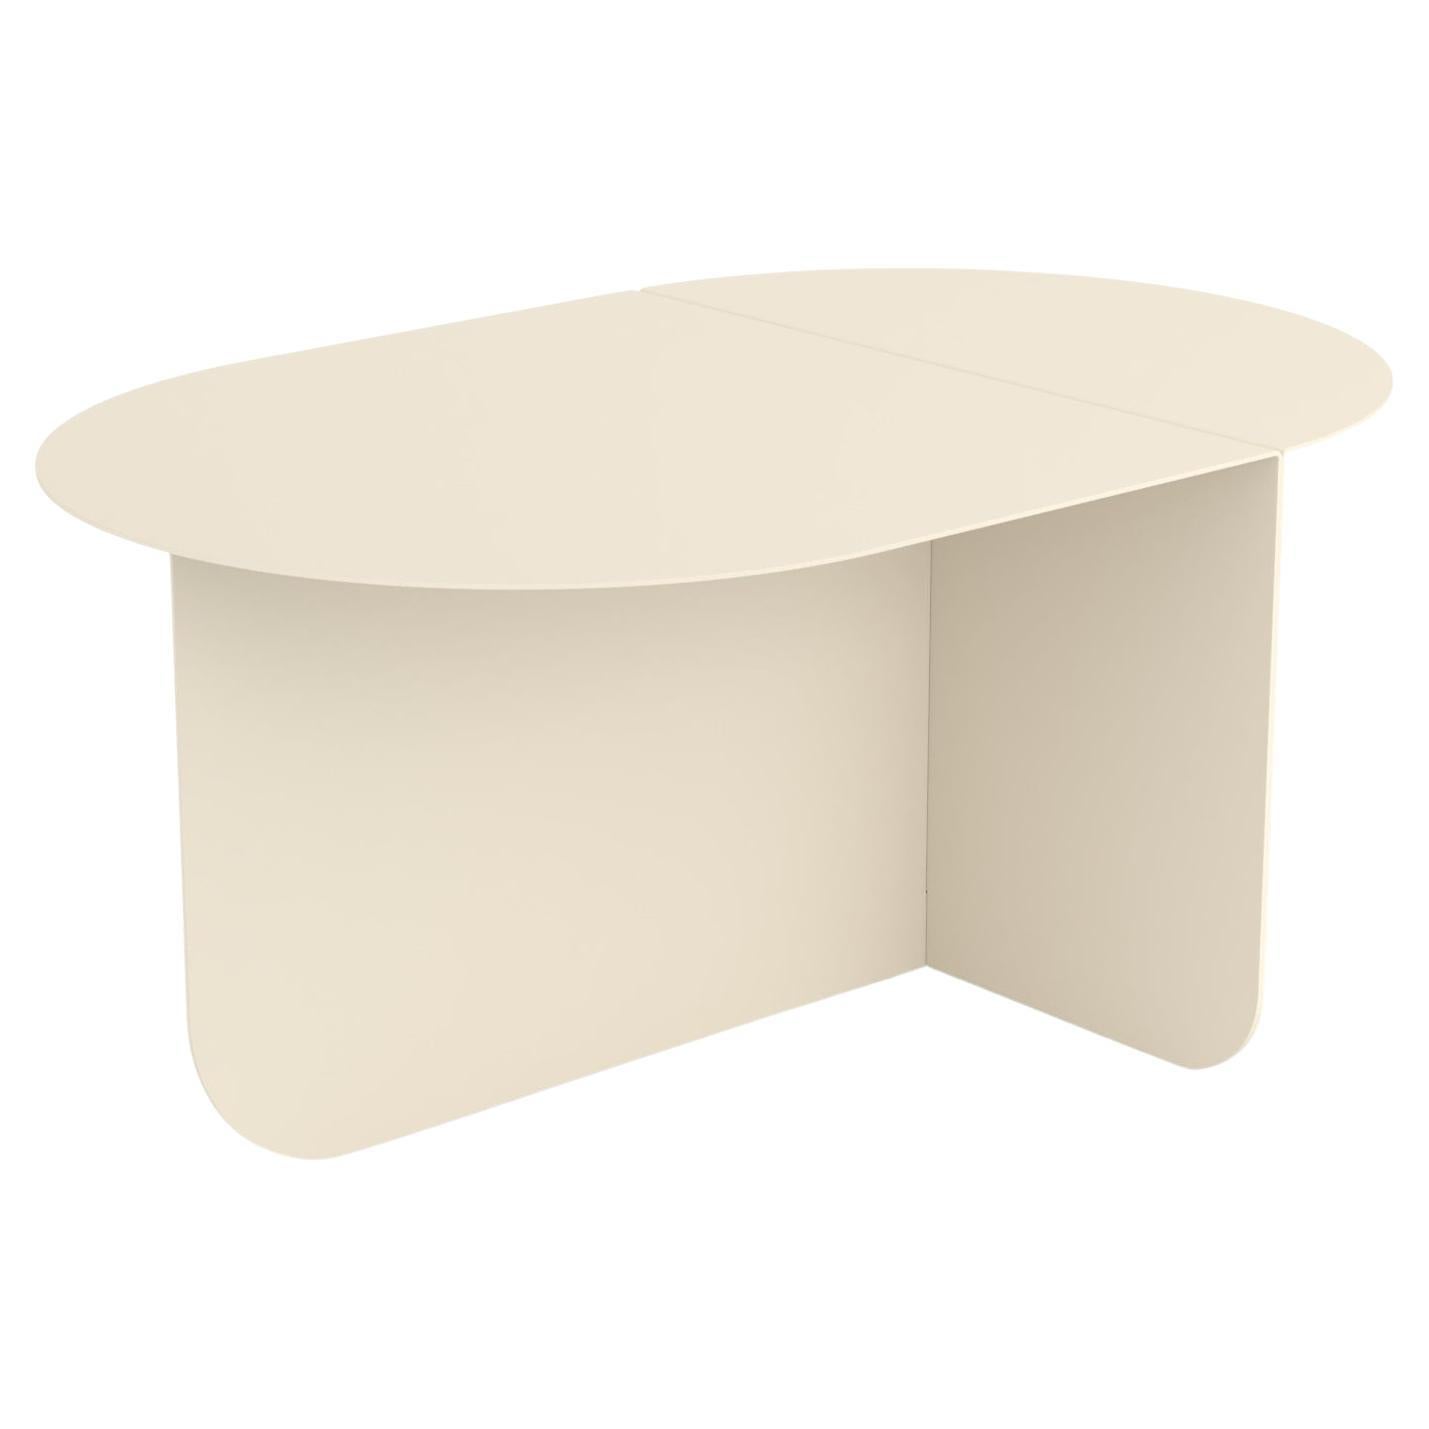 Colour, a Modern Oval Coffee Table, Ral 1013 - Oyster White, by Bas Vellekoop For Sale